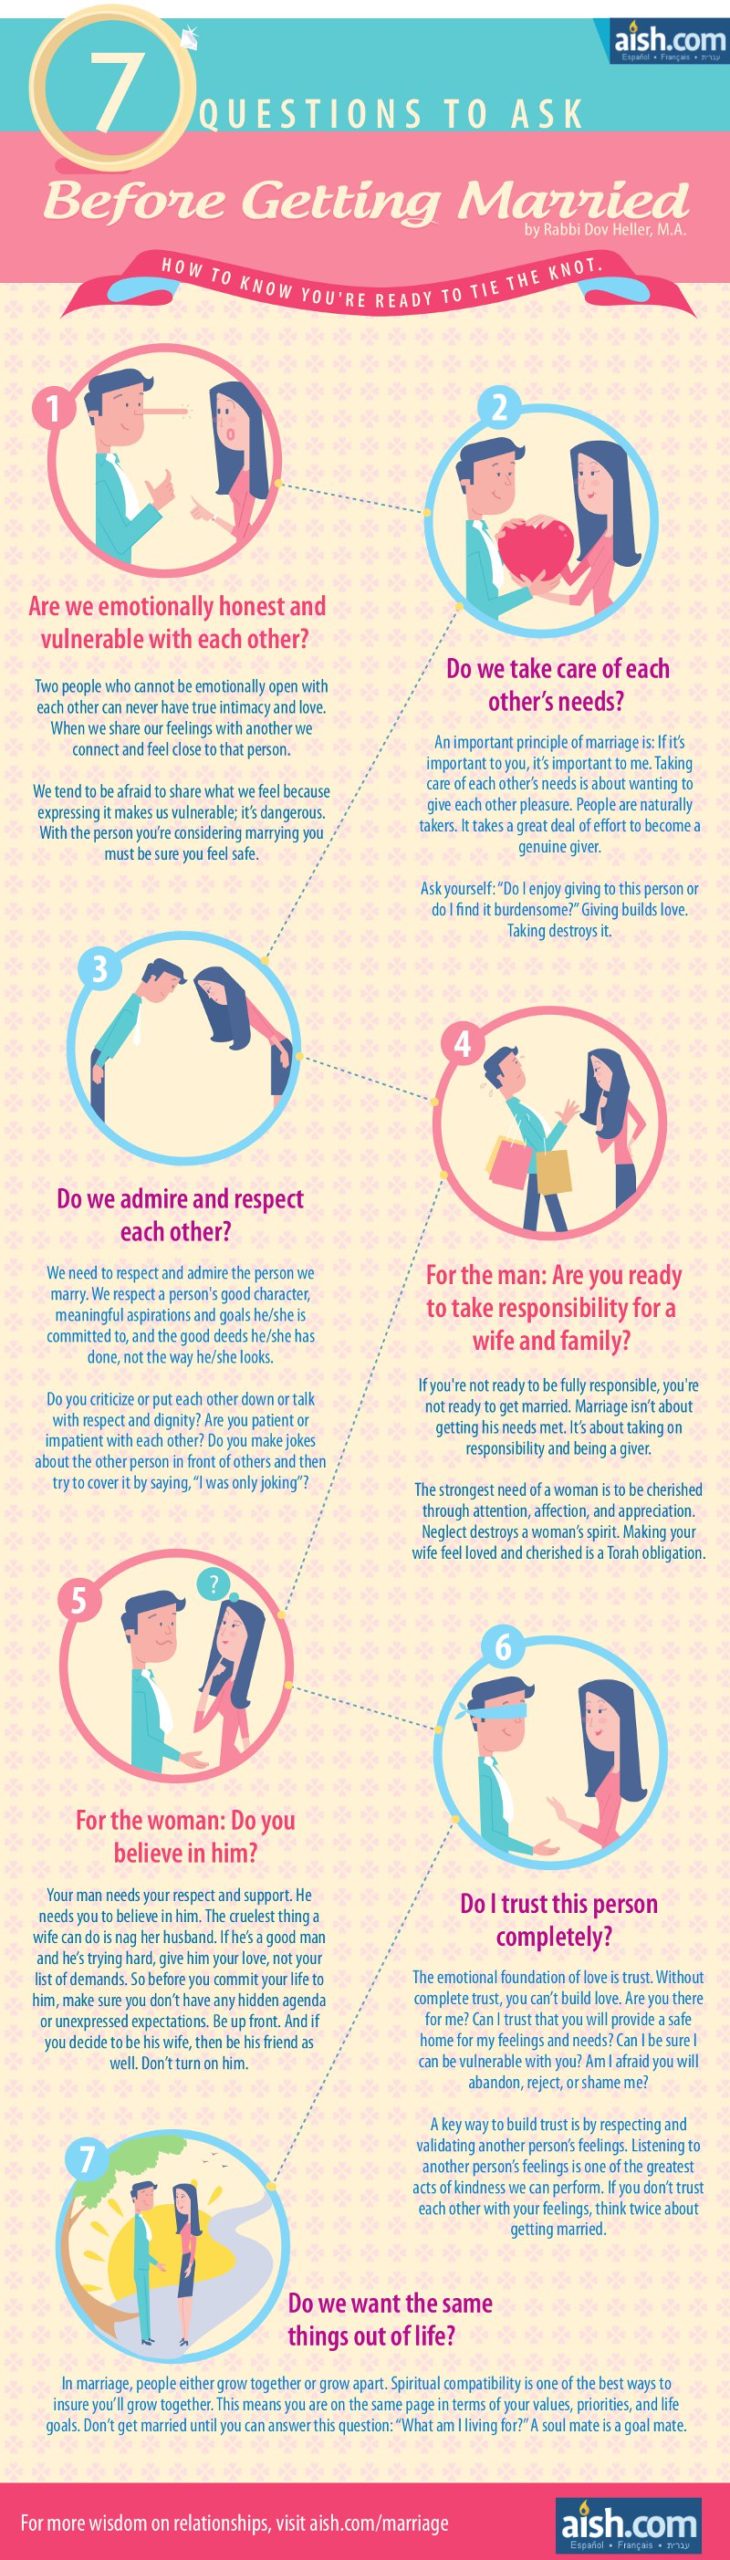 7 Questions to ask before getting married.